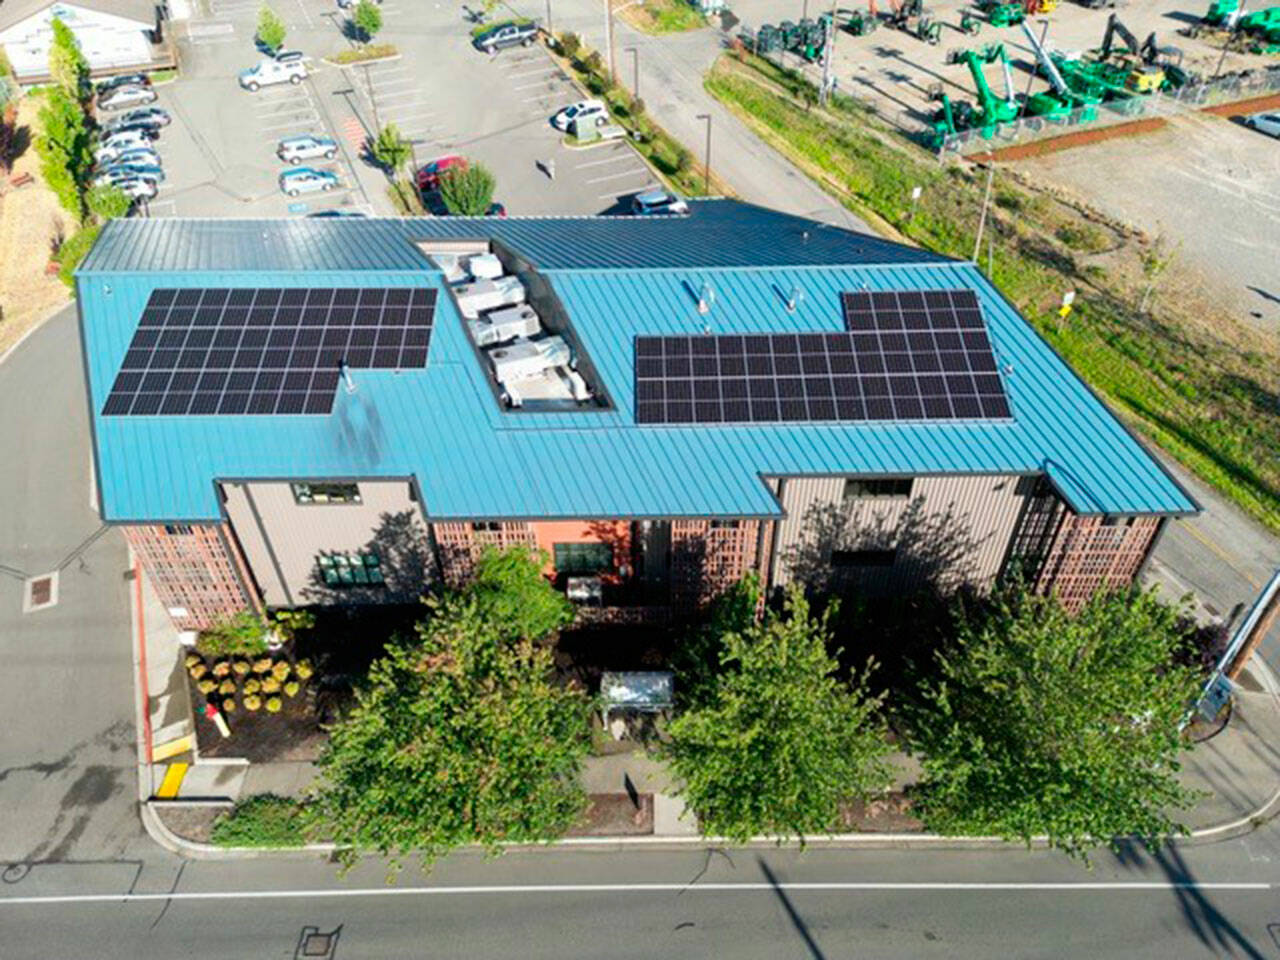 PSE courtesy photo
The solar array on the roof of Fishline Food Bank & Comprehensive Services in Poulsbo.